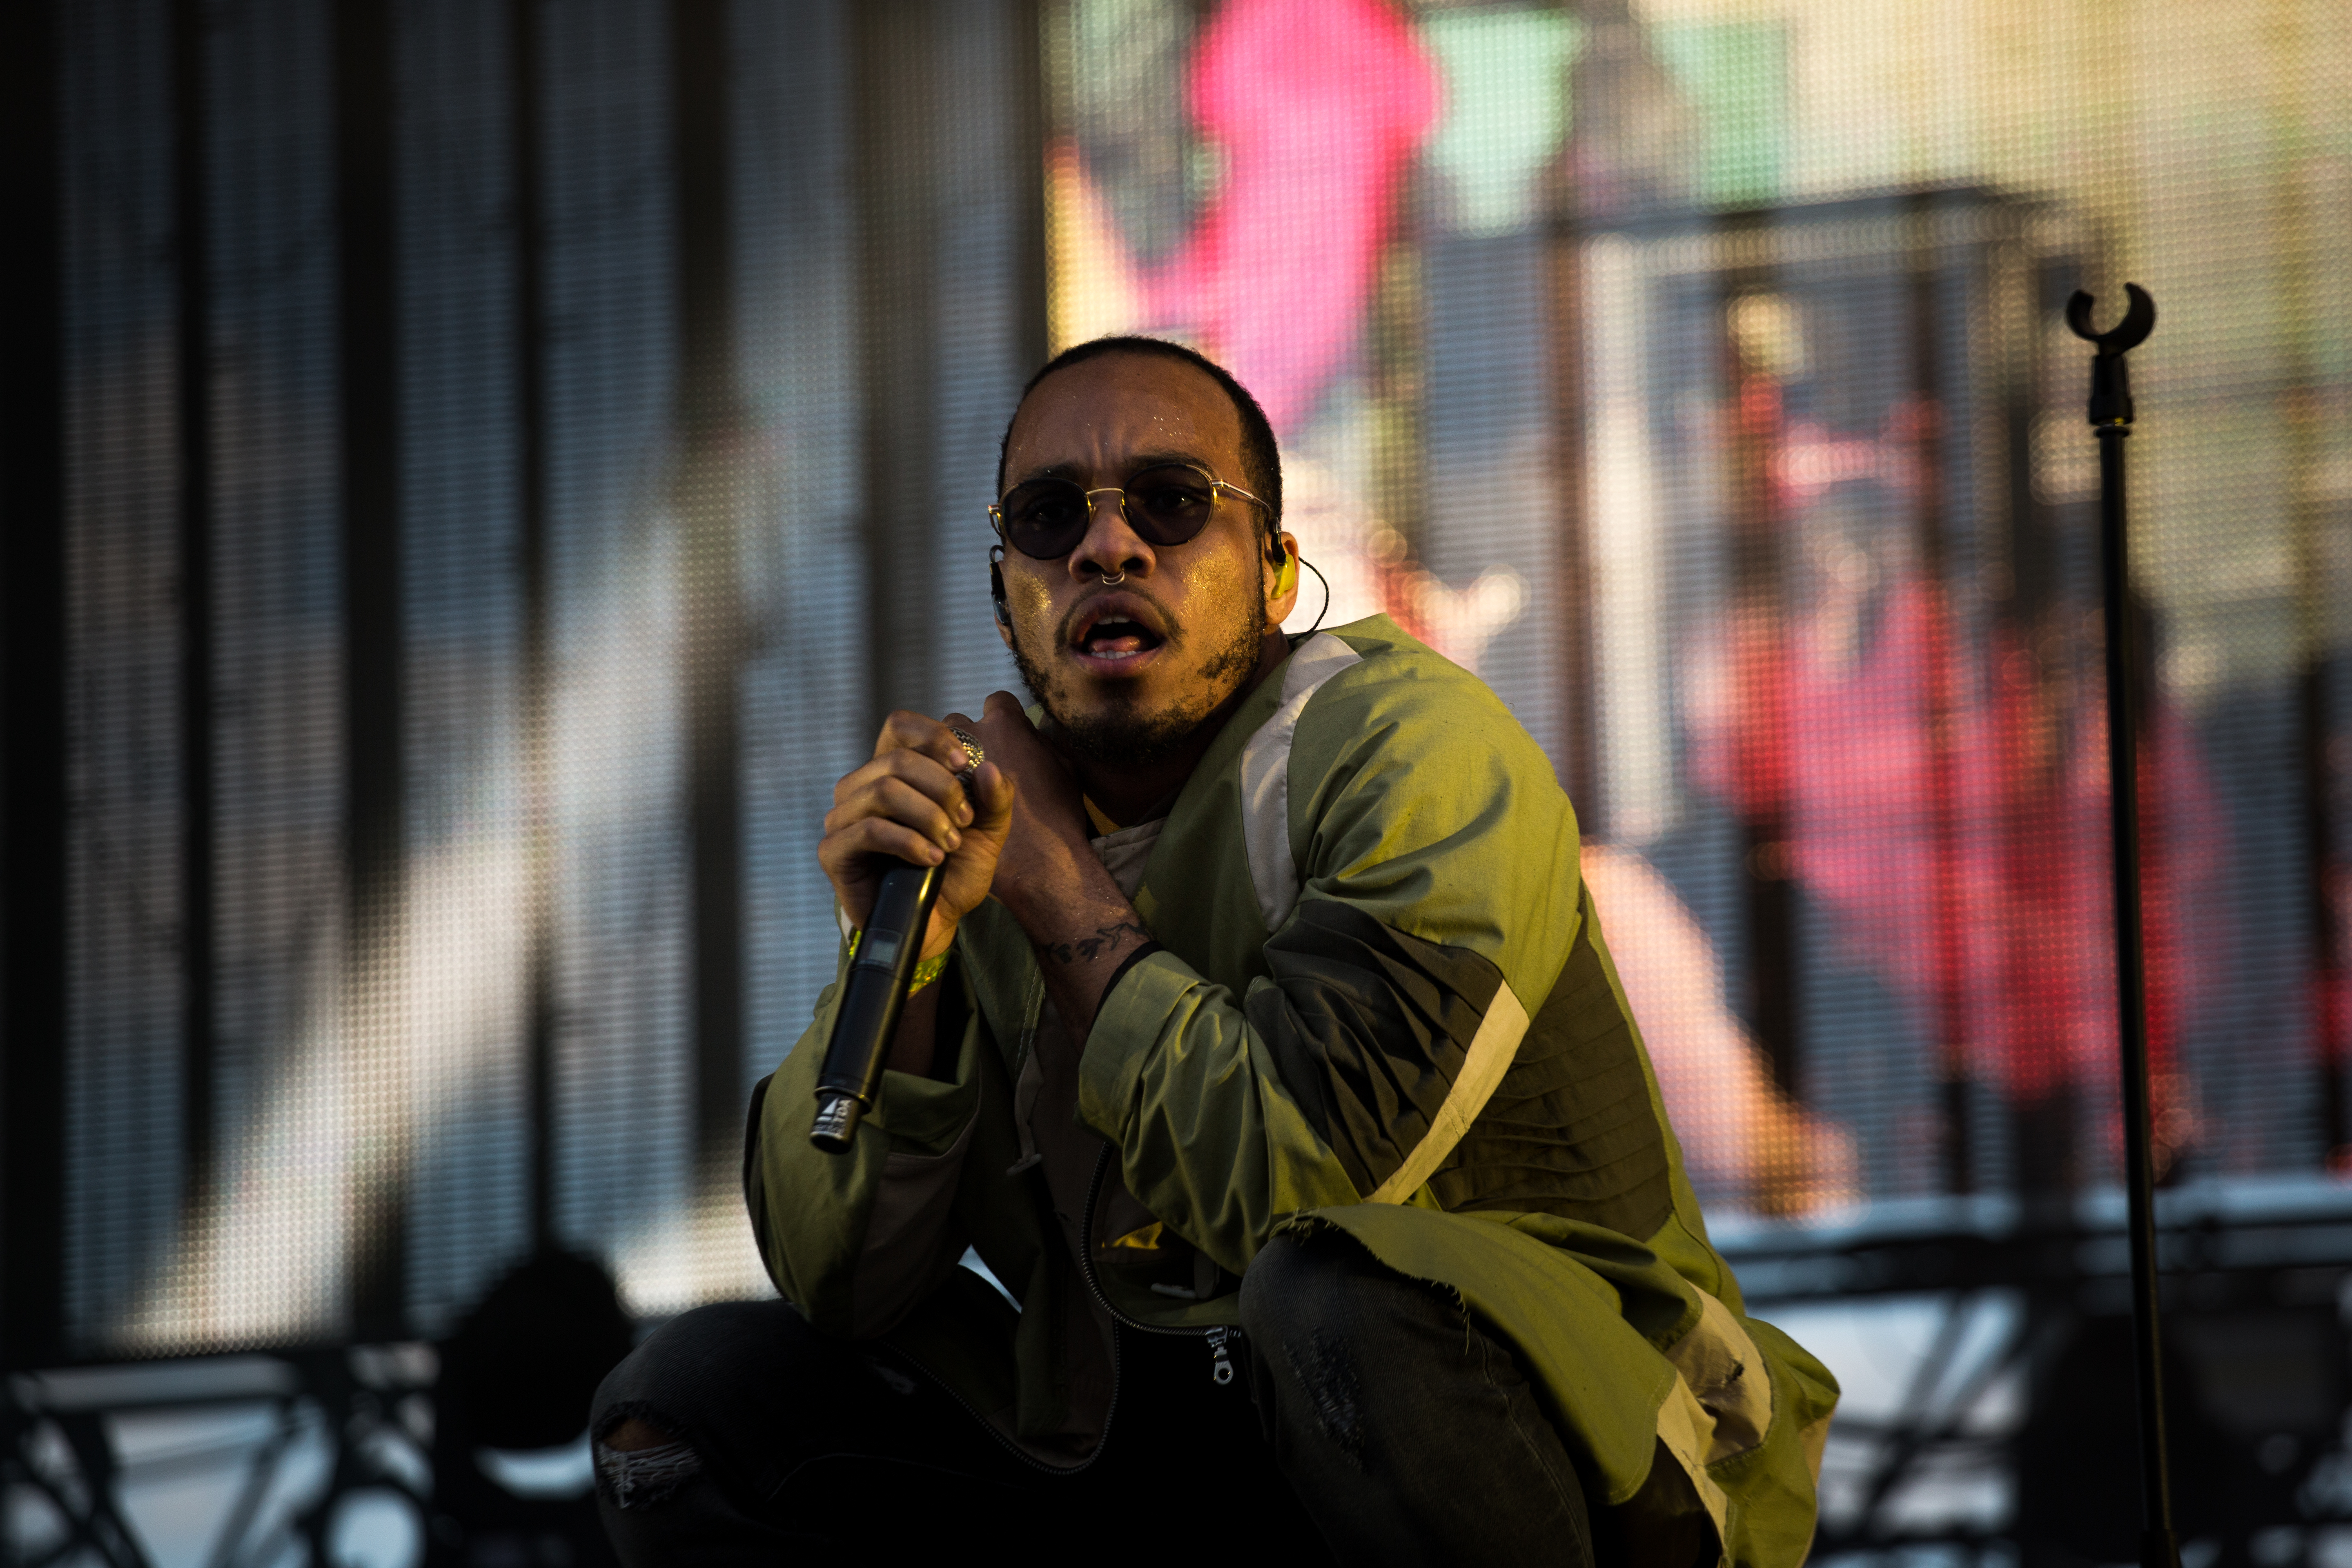 anderson-paak_28106275865_o